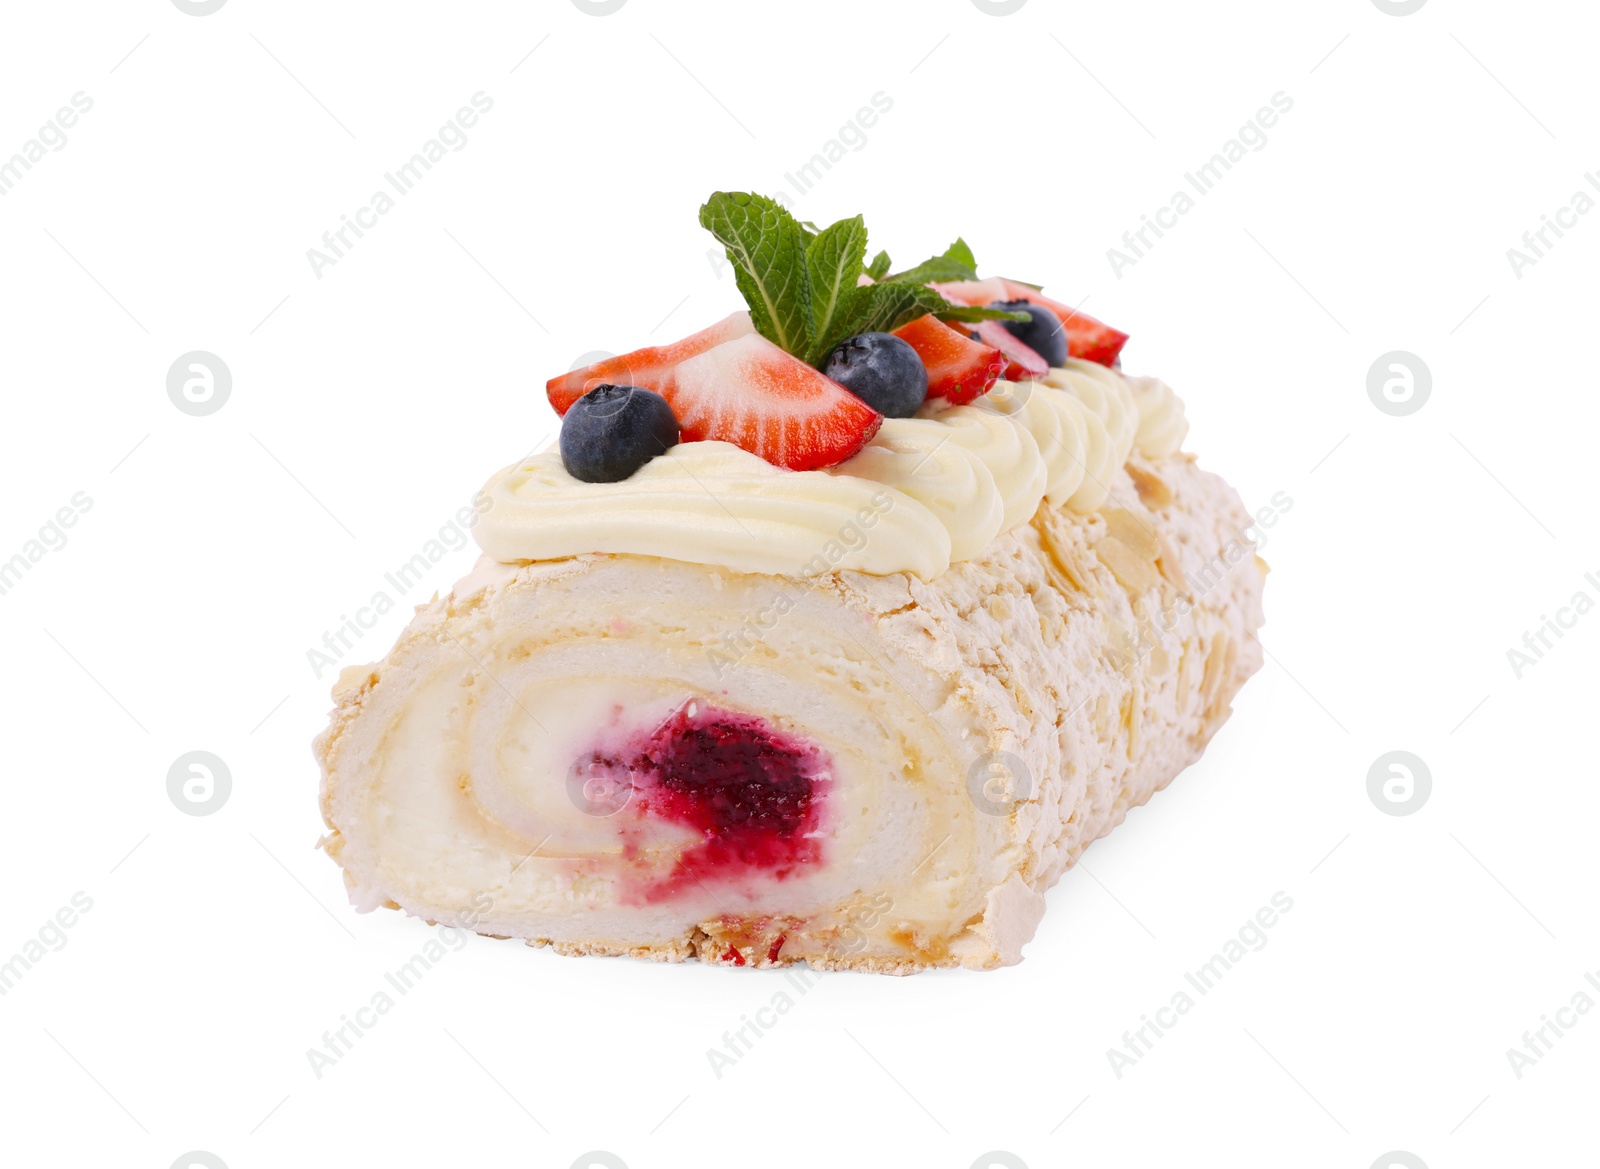 Photo of Tasty meringue roll with jam, berries and mint leaves isolated on white